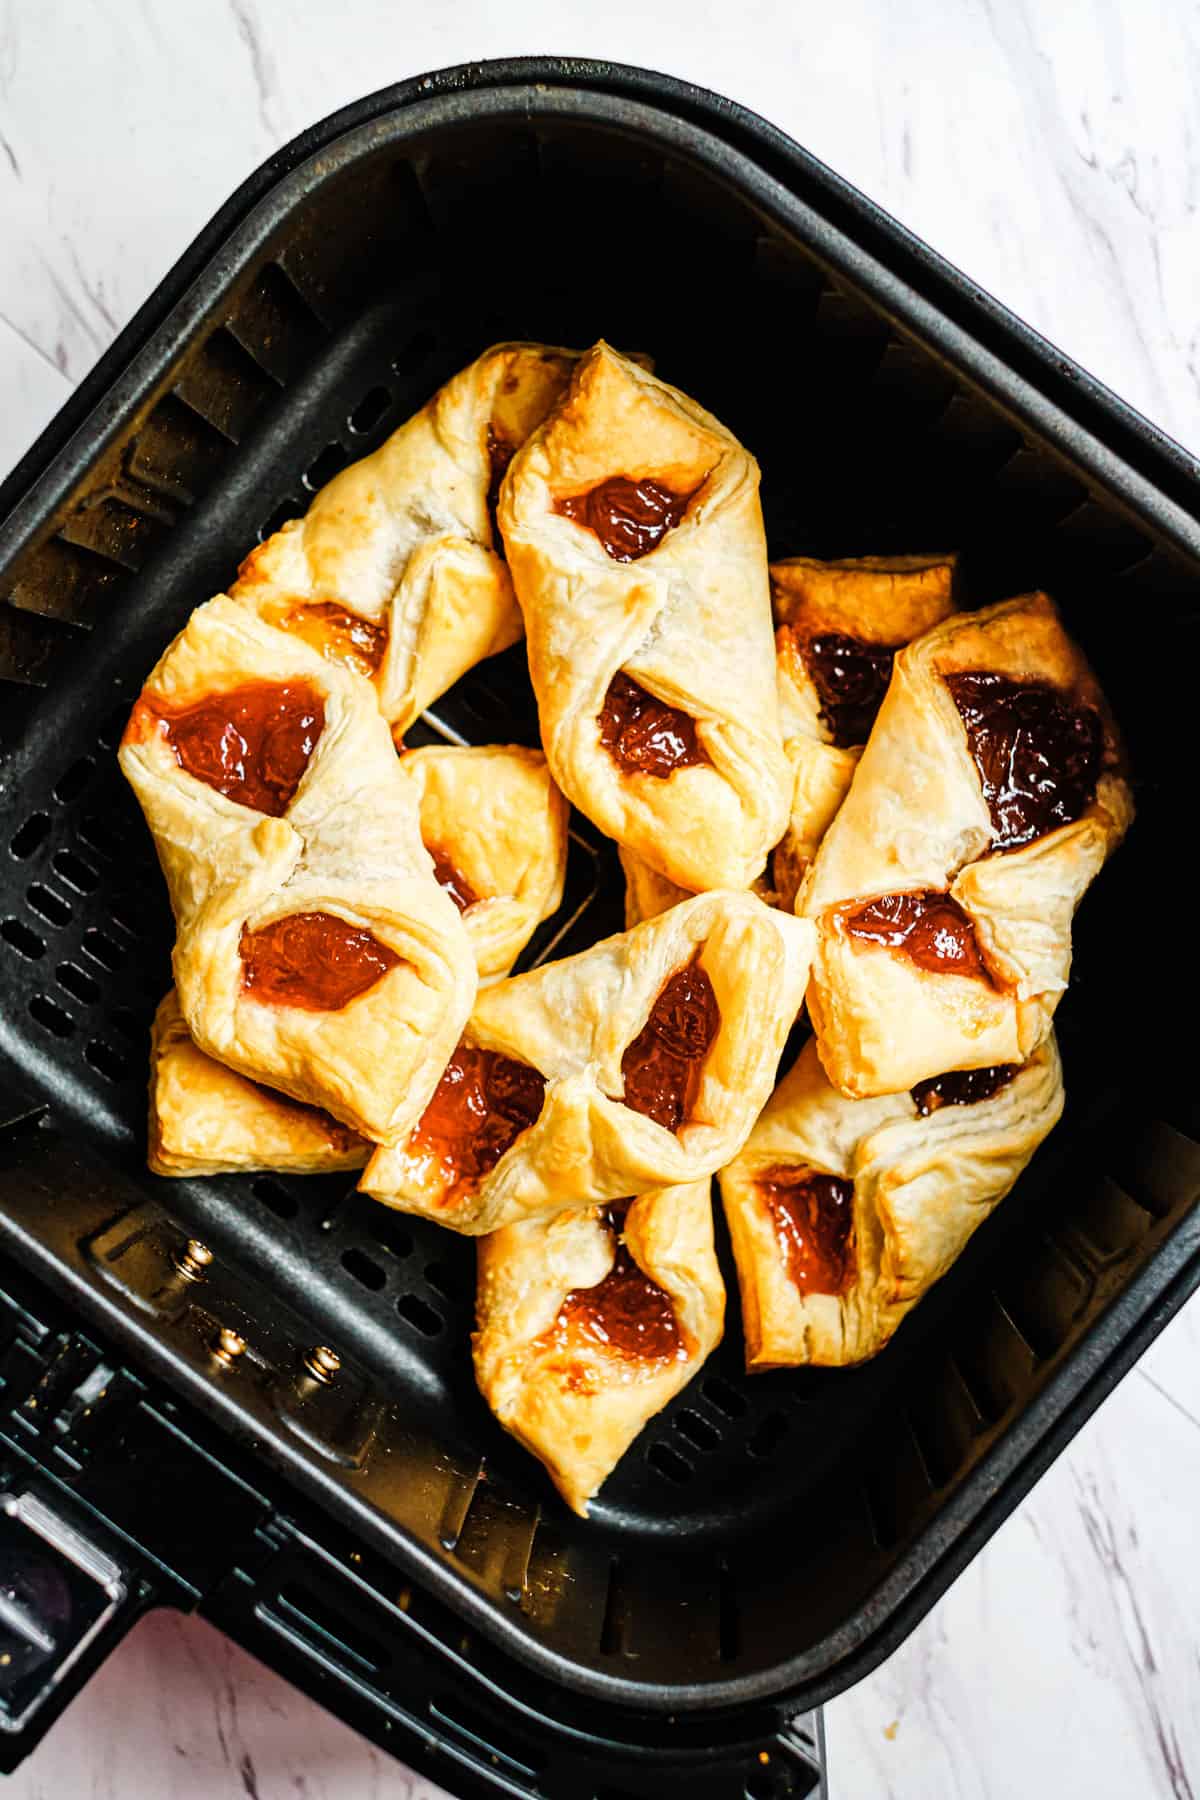 An overhead view of cooked air-fried puff pastry breakfast bites placed in the air fryer basket.